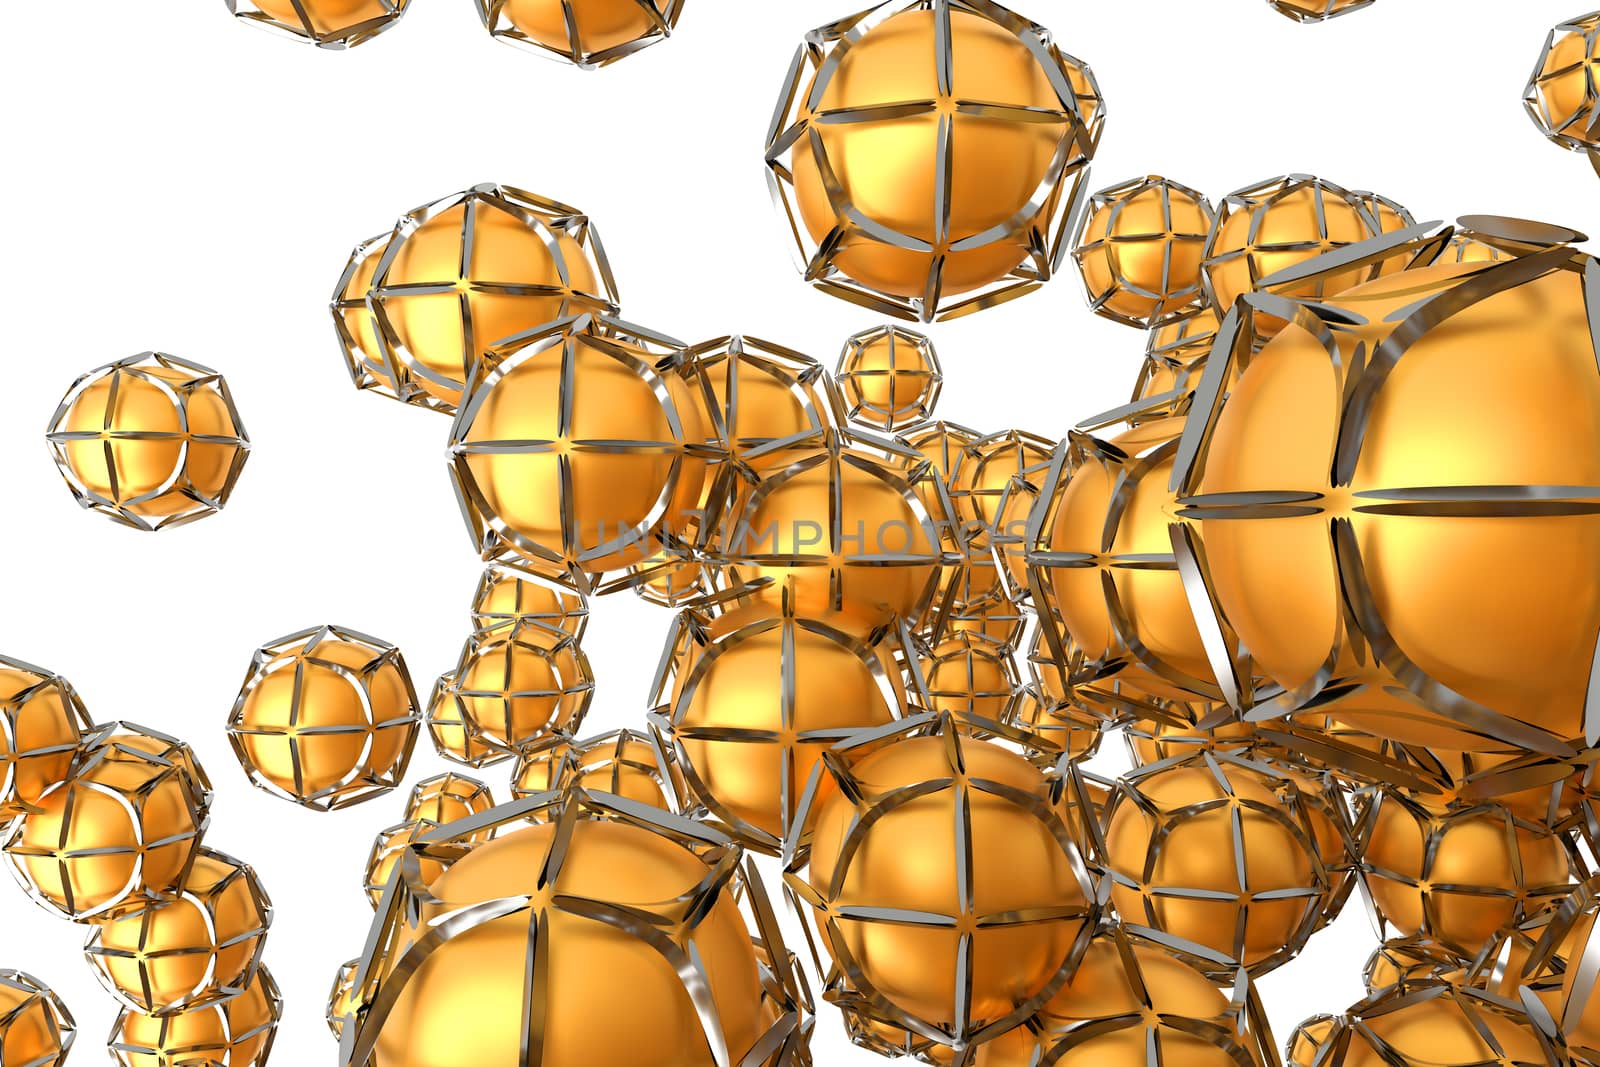 Abstract background from metal spheres in a frame shell. 3d illustration on white background. Template for your design